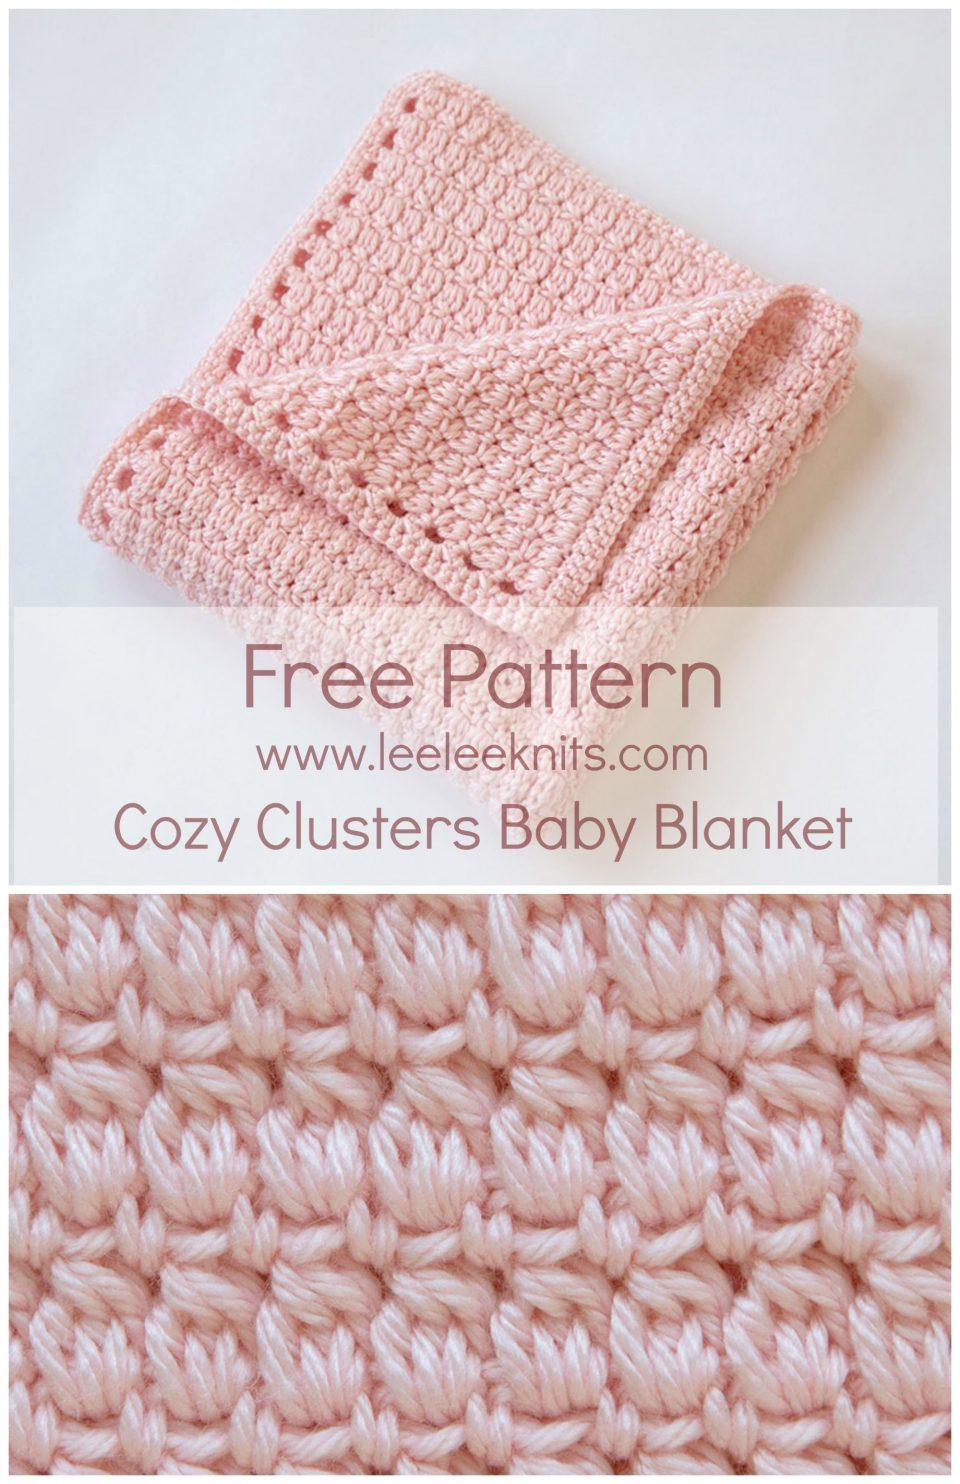 Knitted Baby Blanket Pattern Free Diy Knit Blanket Pattern Beginner Ba Best Knitting Patterns Free